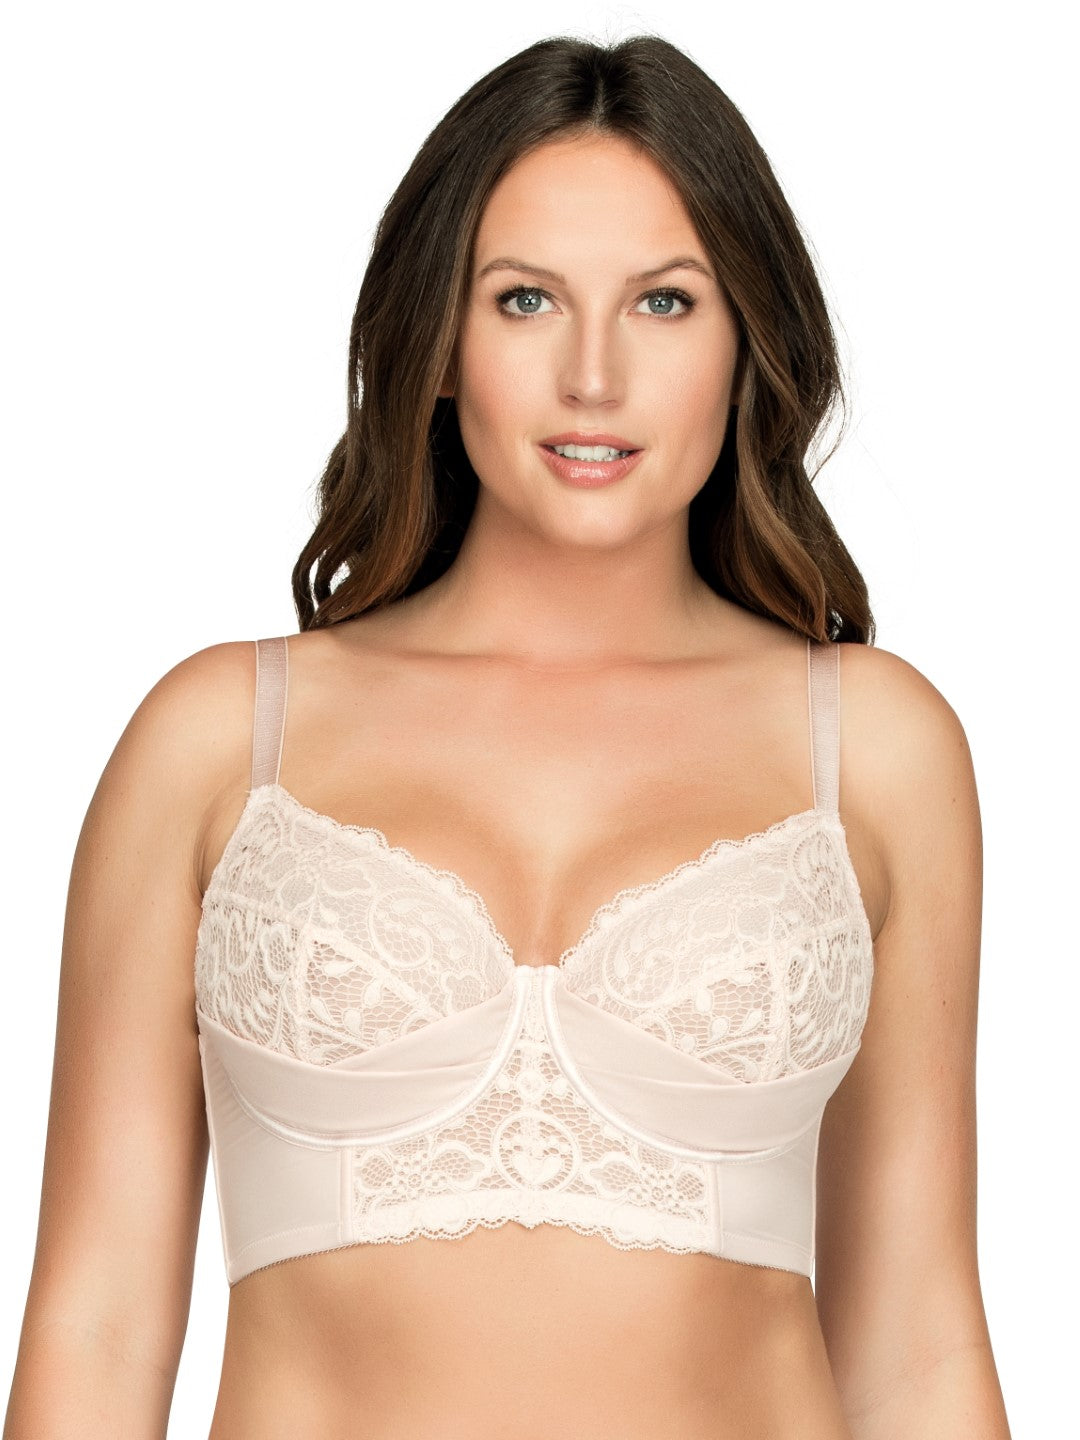 Buy Sexy Lingerie In India, Cora Unlined Longline Bra - Pale Blush